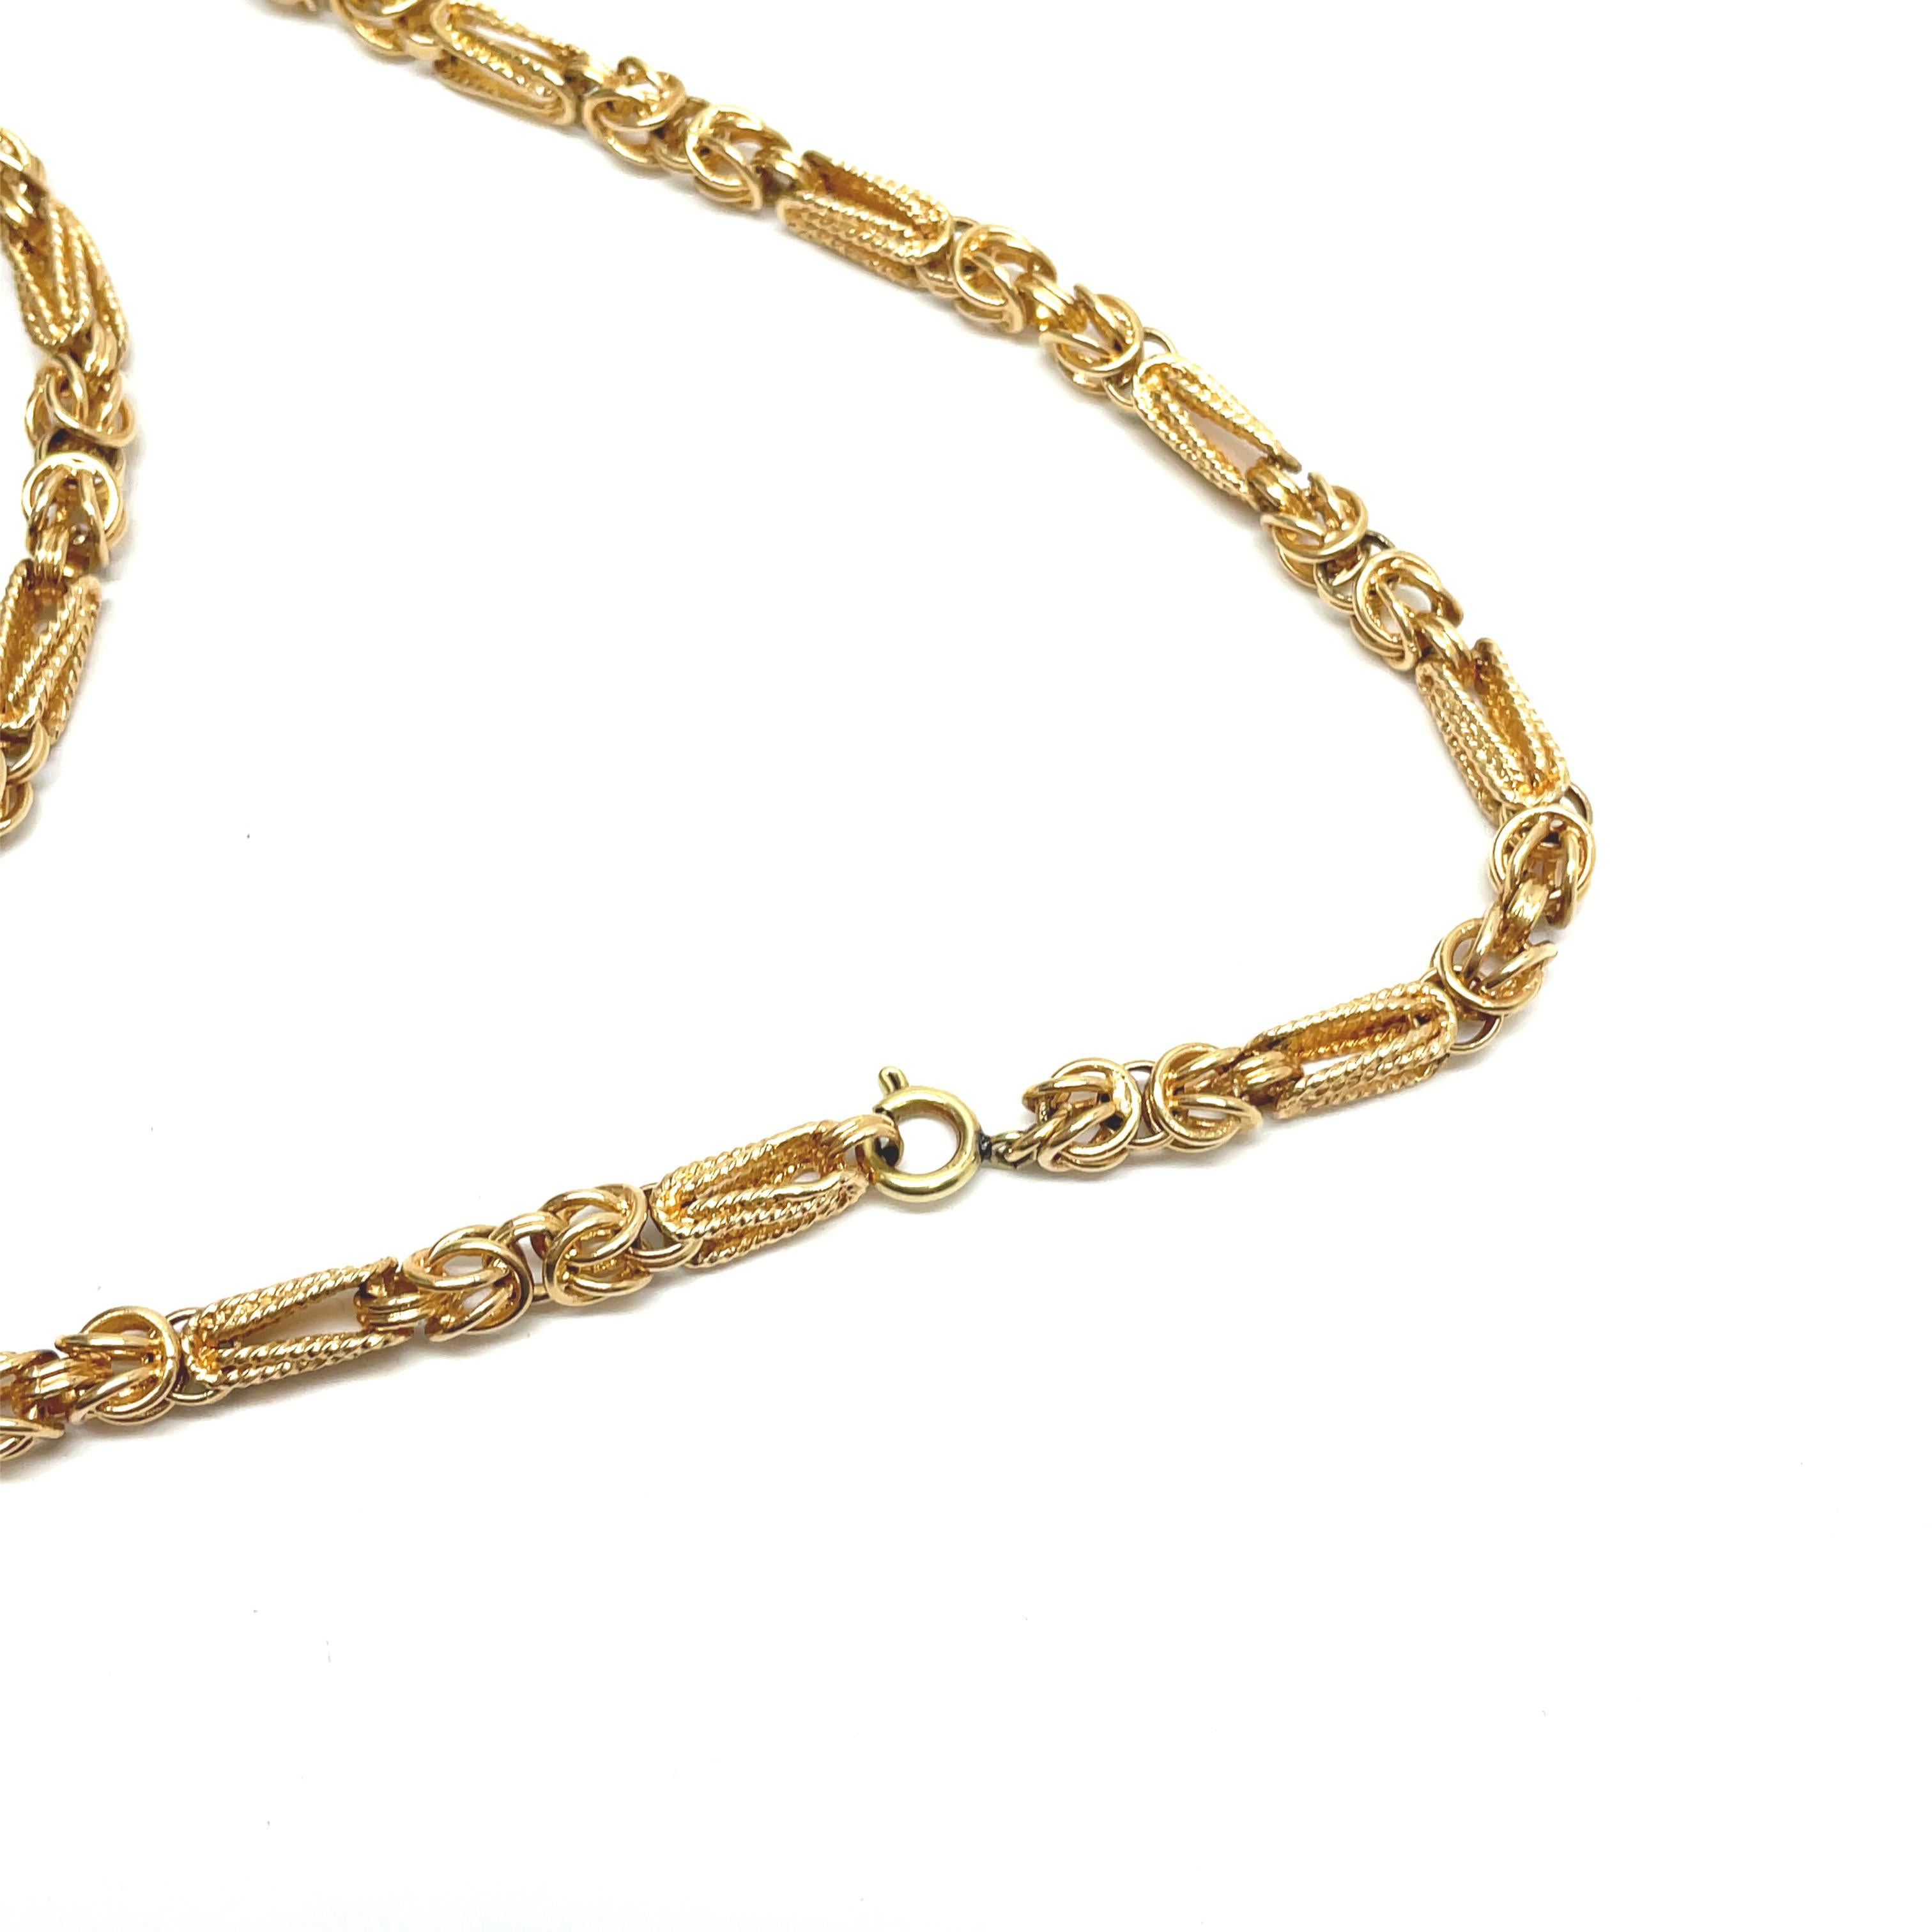 1970's Hand-Crafted Long Yellow Gold Chain 5